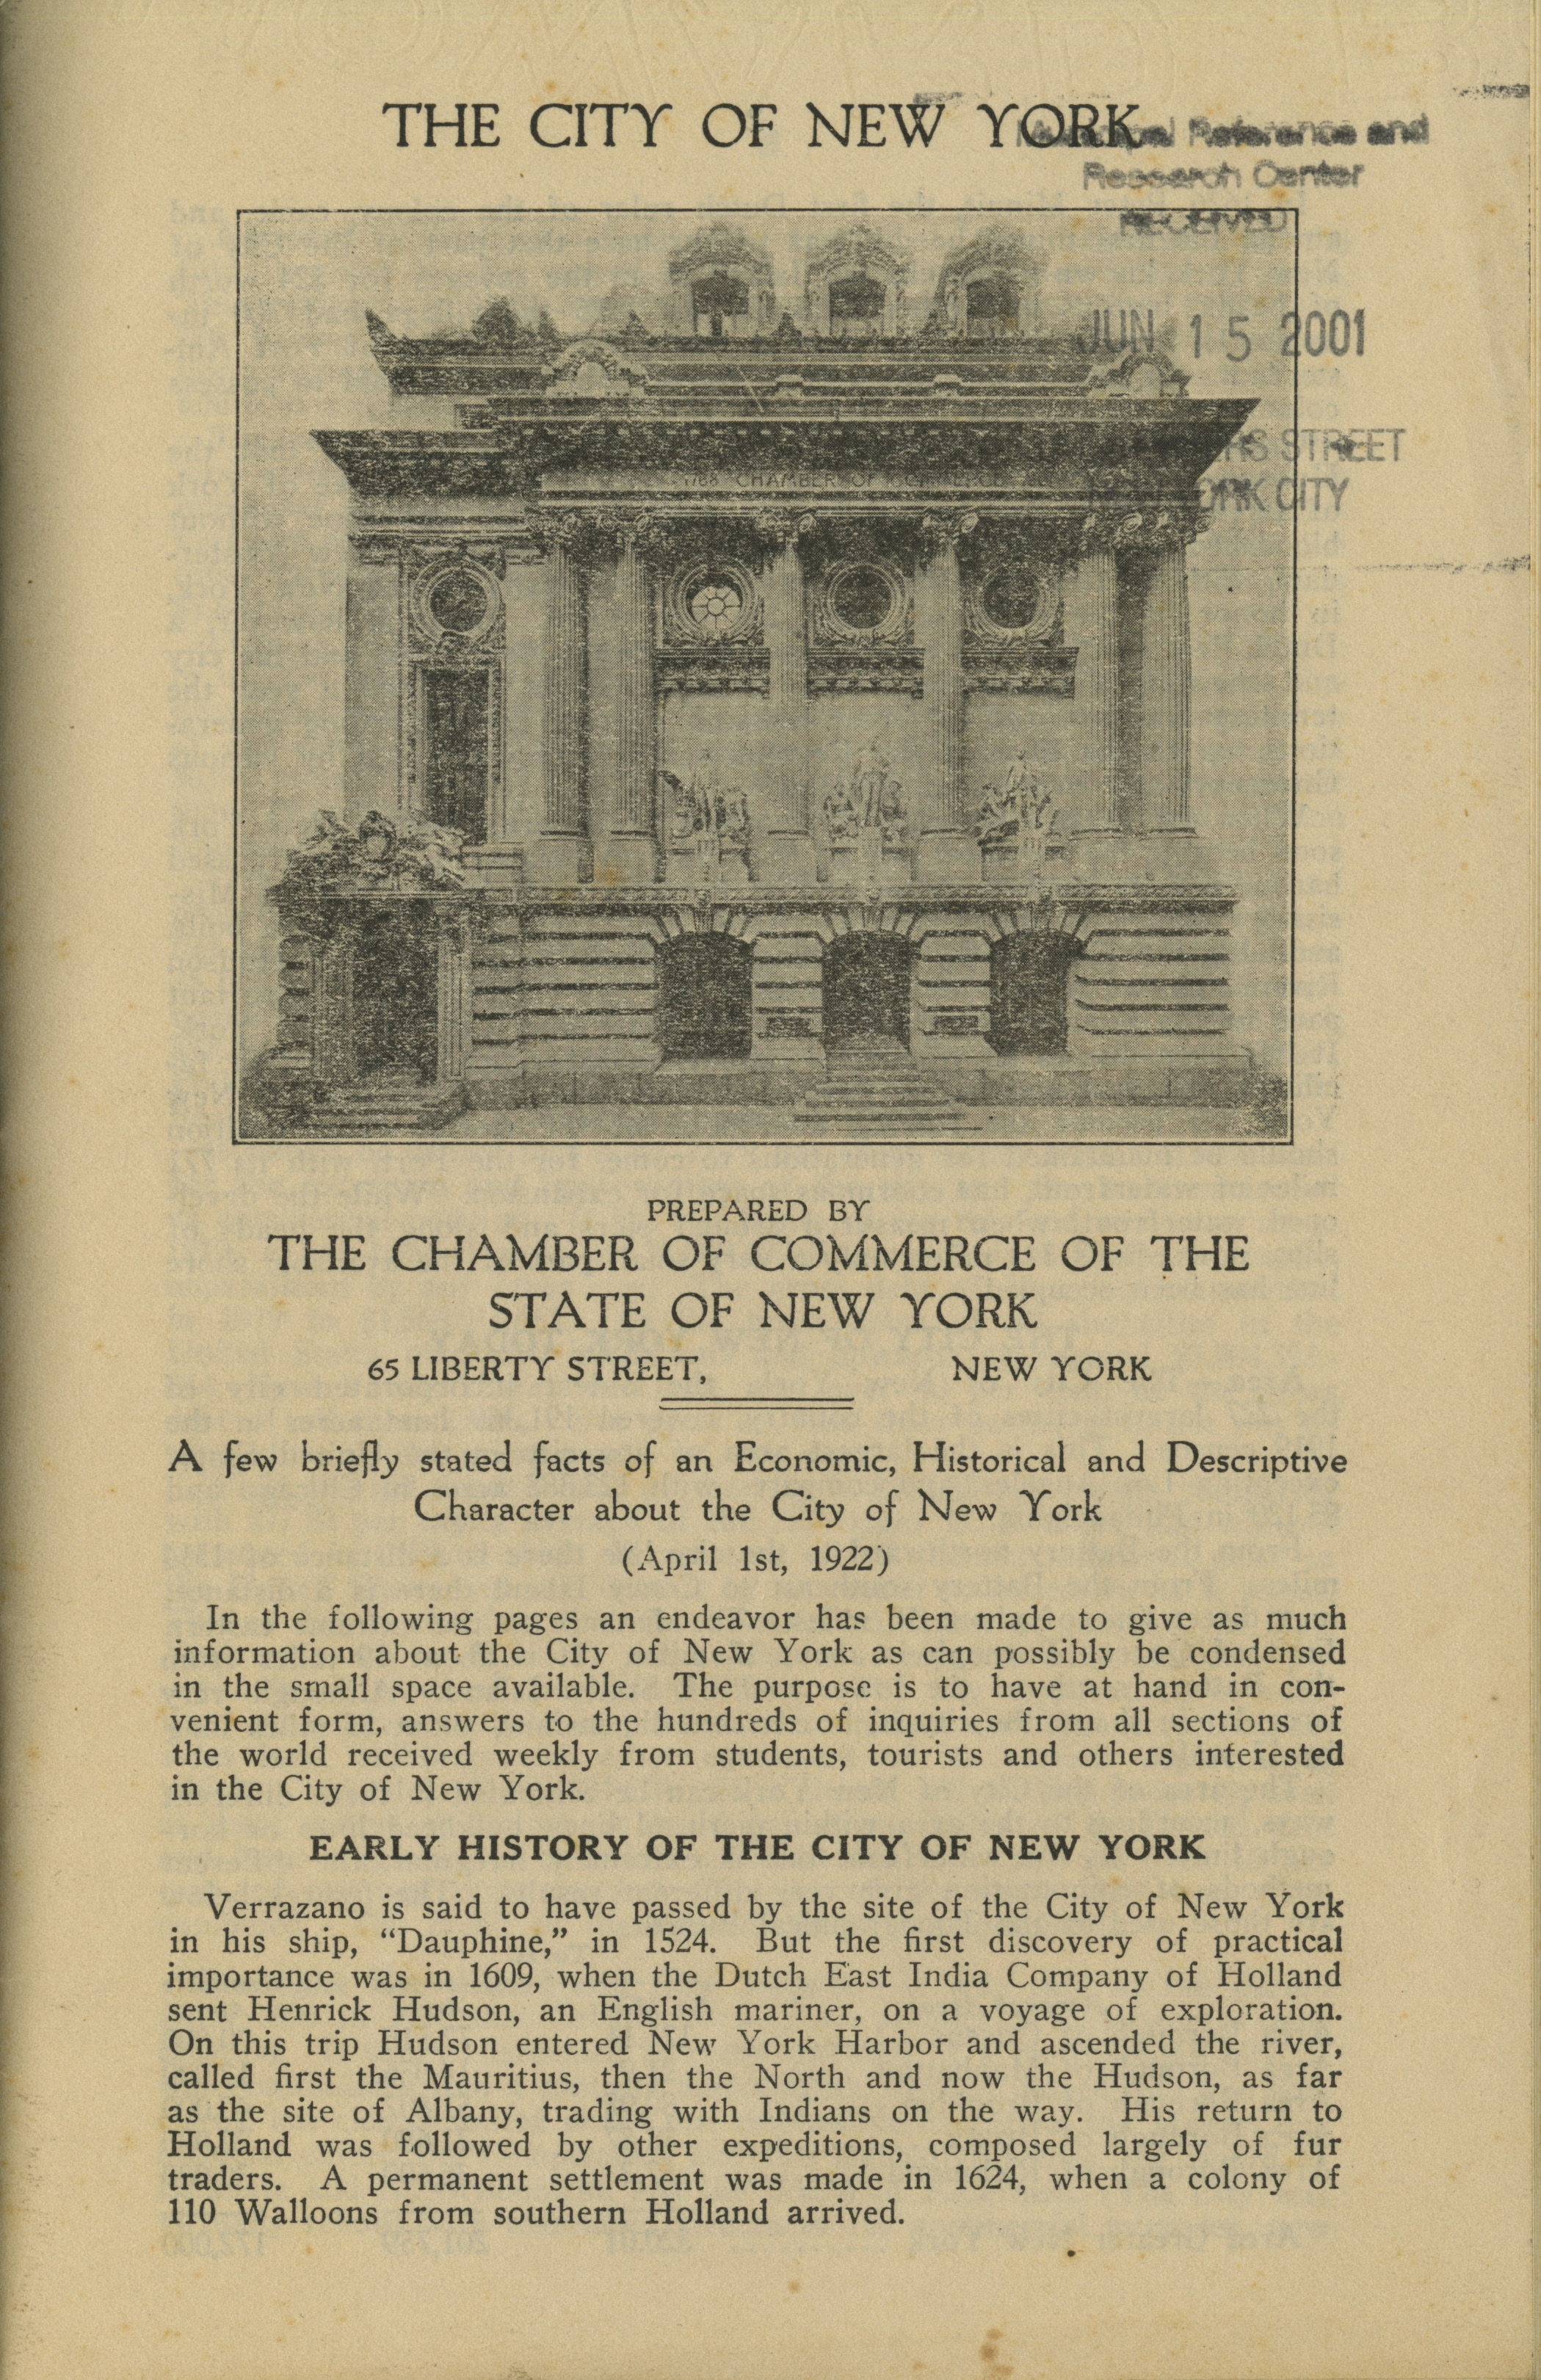 Text with a black and white picture of the Chamber of Commerce building at 65 Liberty St. in 1922.